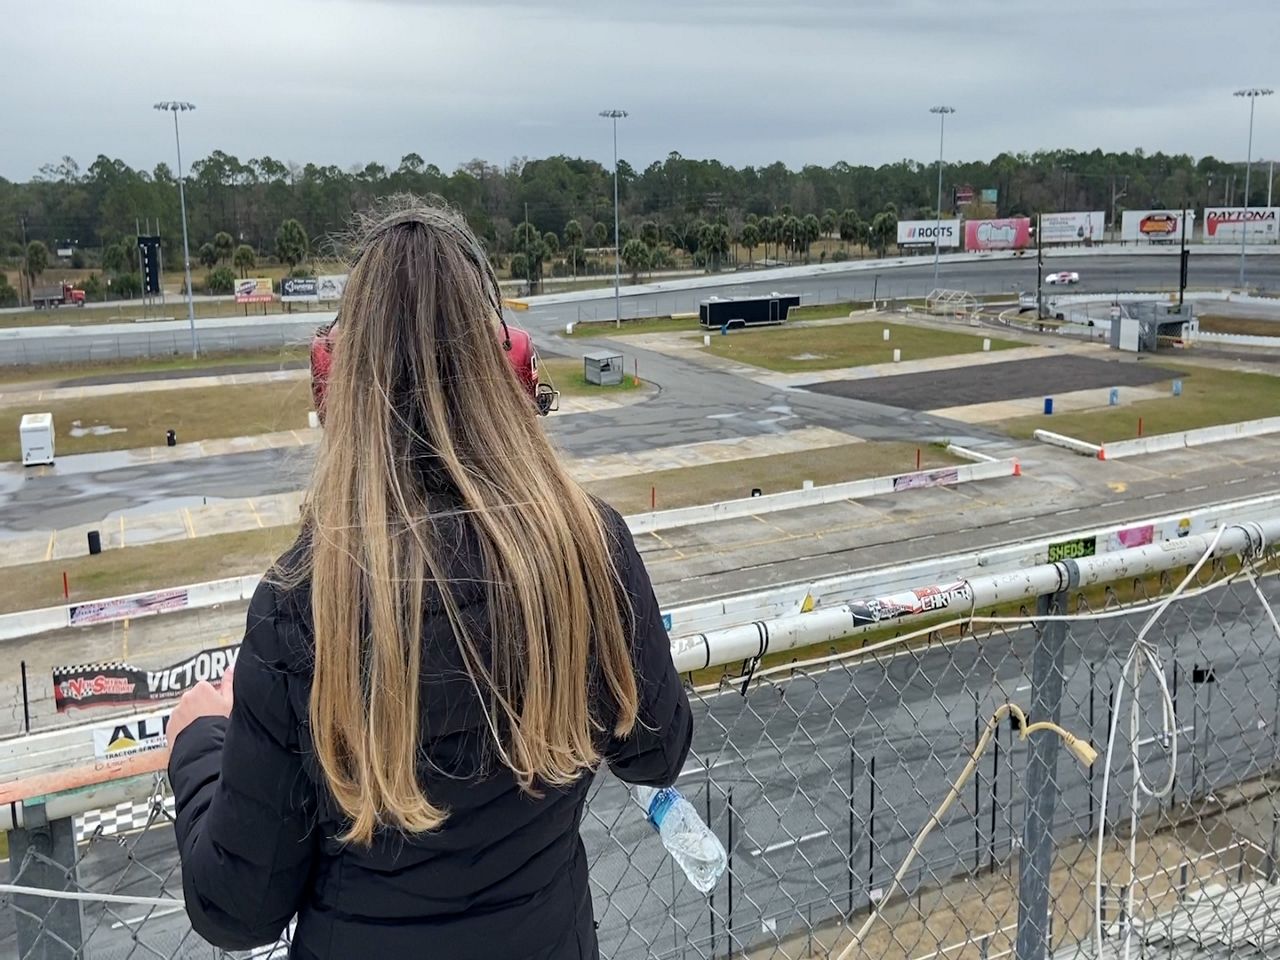 Husband and wife race car driver, spotter duo continue to find success